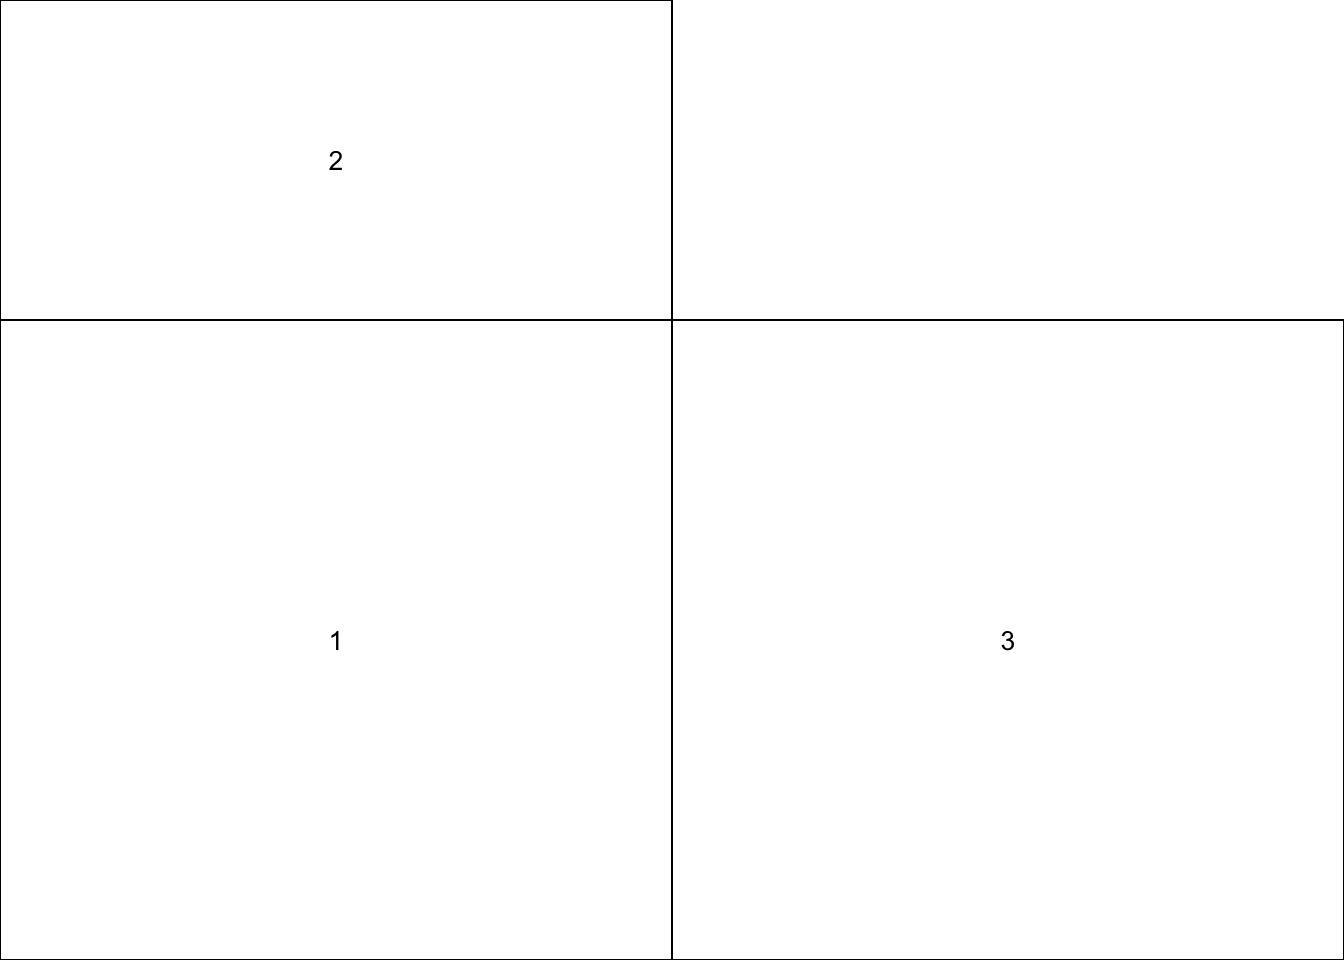 A plotting layout created by setting a layout matrix with two rows and two columns. The first row has a height of 1, and the second row has a hight of 2. Both columns have the same width of 2.